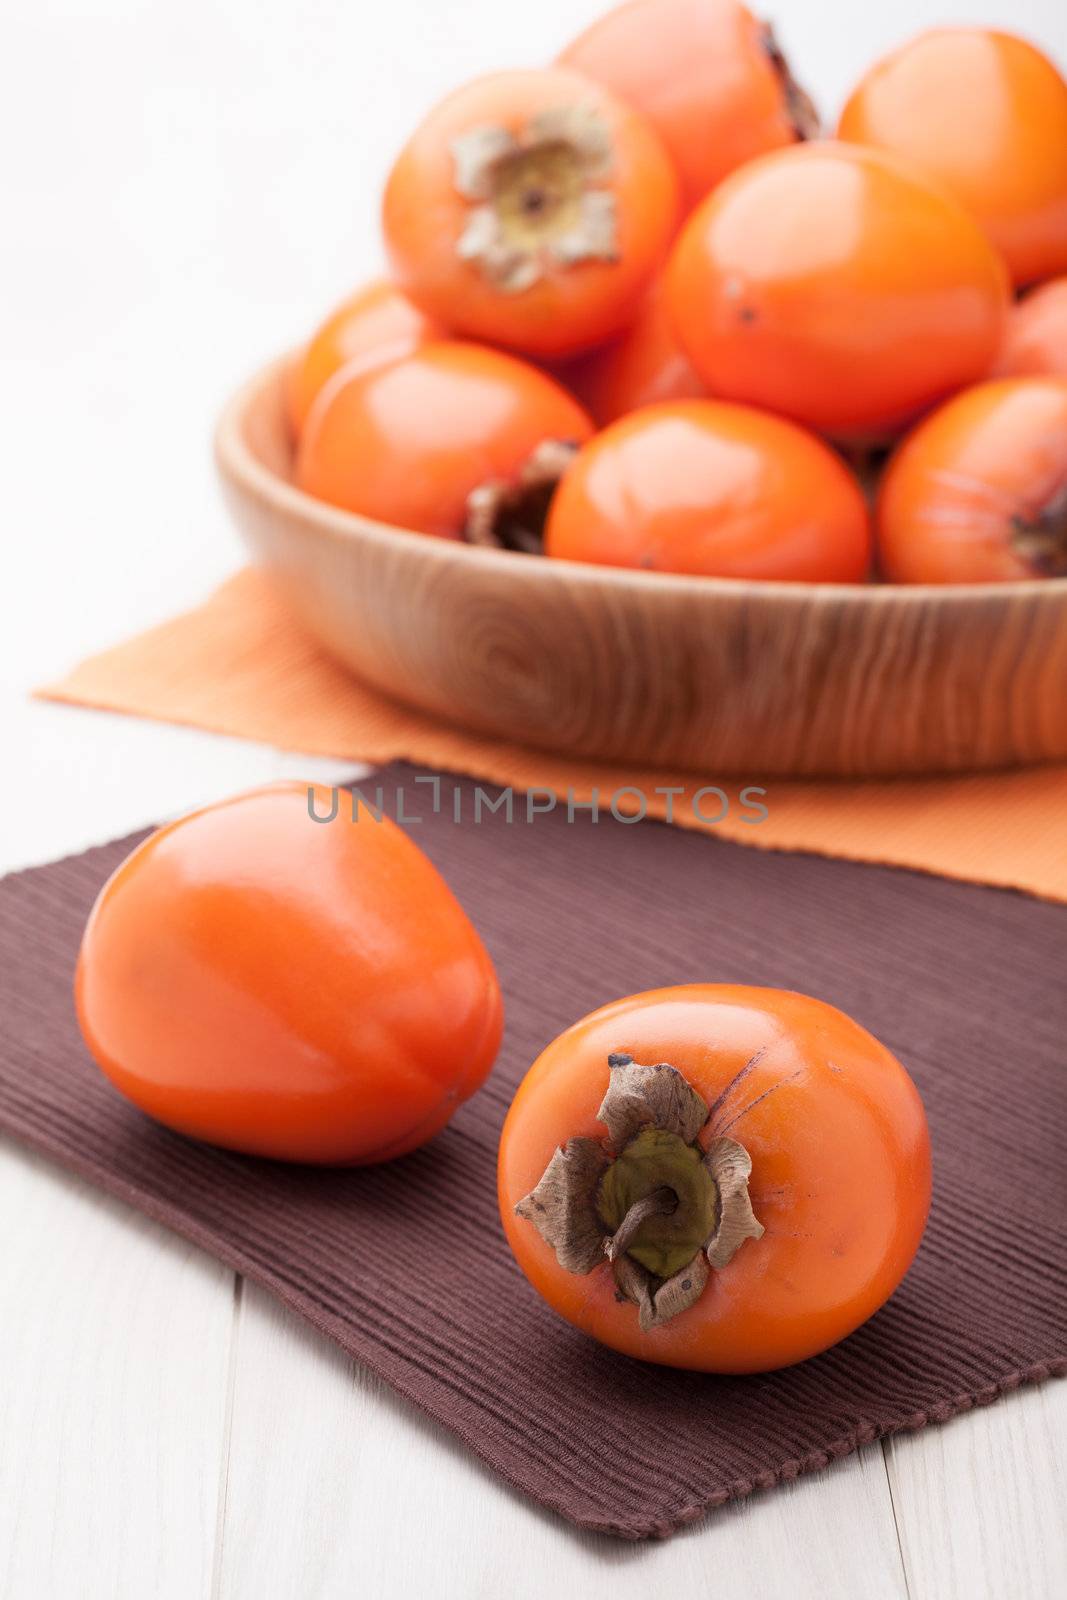 Fresh exotic tropic ripe juicy orange fruits  persimmon Diospyros served in wooden plate on table